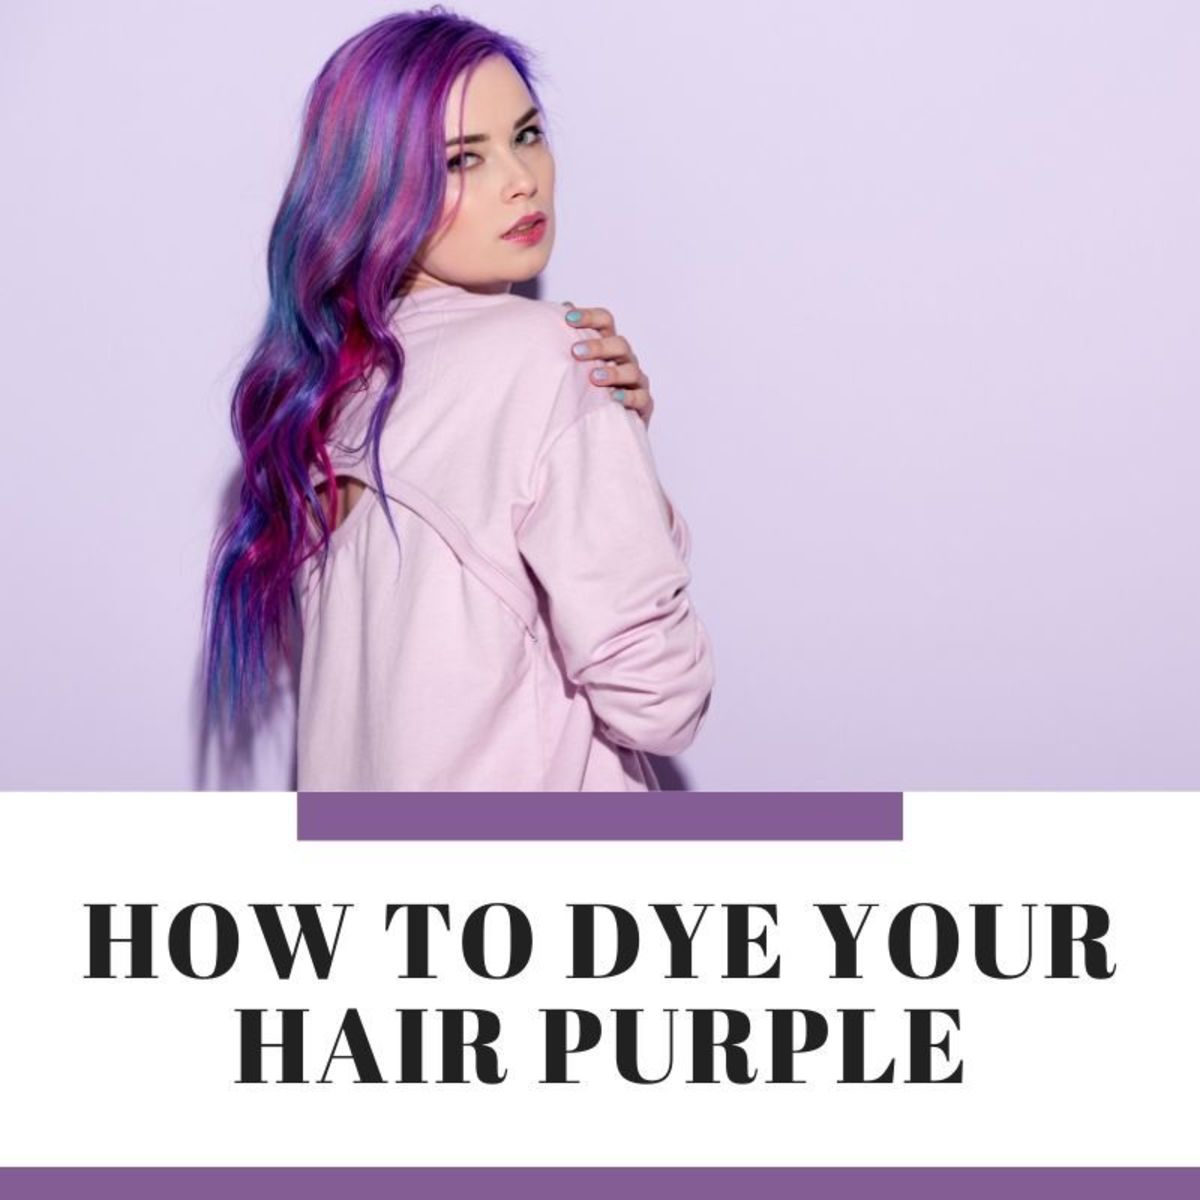 This article will tell you everything you need to know to dye your hair all kinds of shades of purple, as well as how to care for your hair so that those colors stay as long as possible.